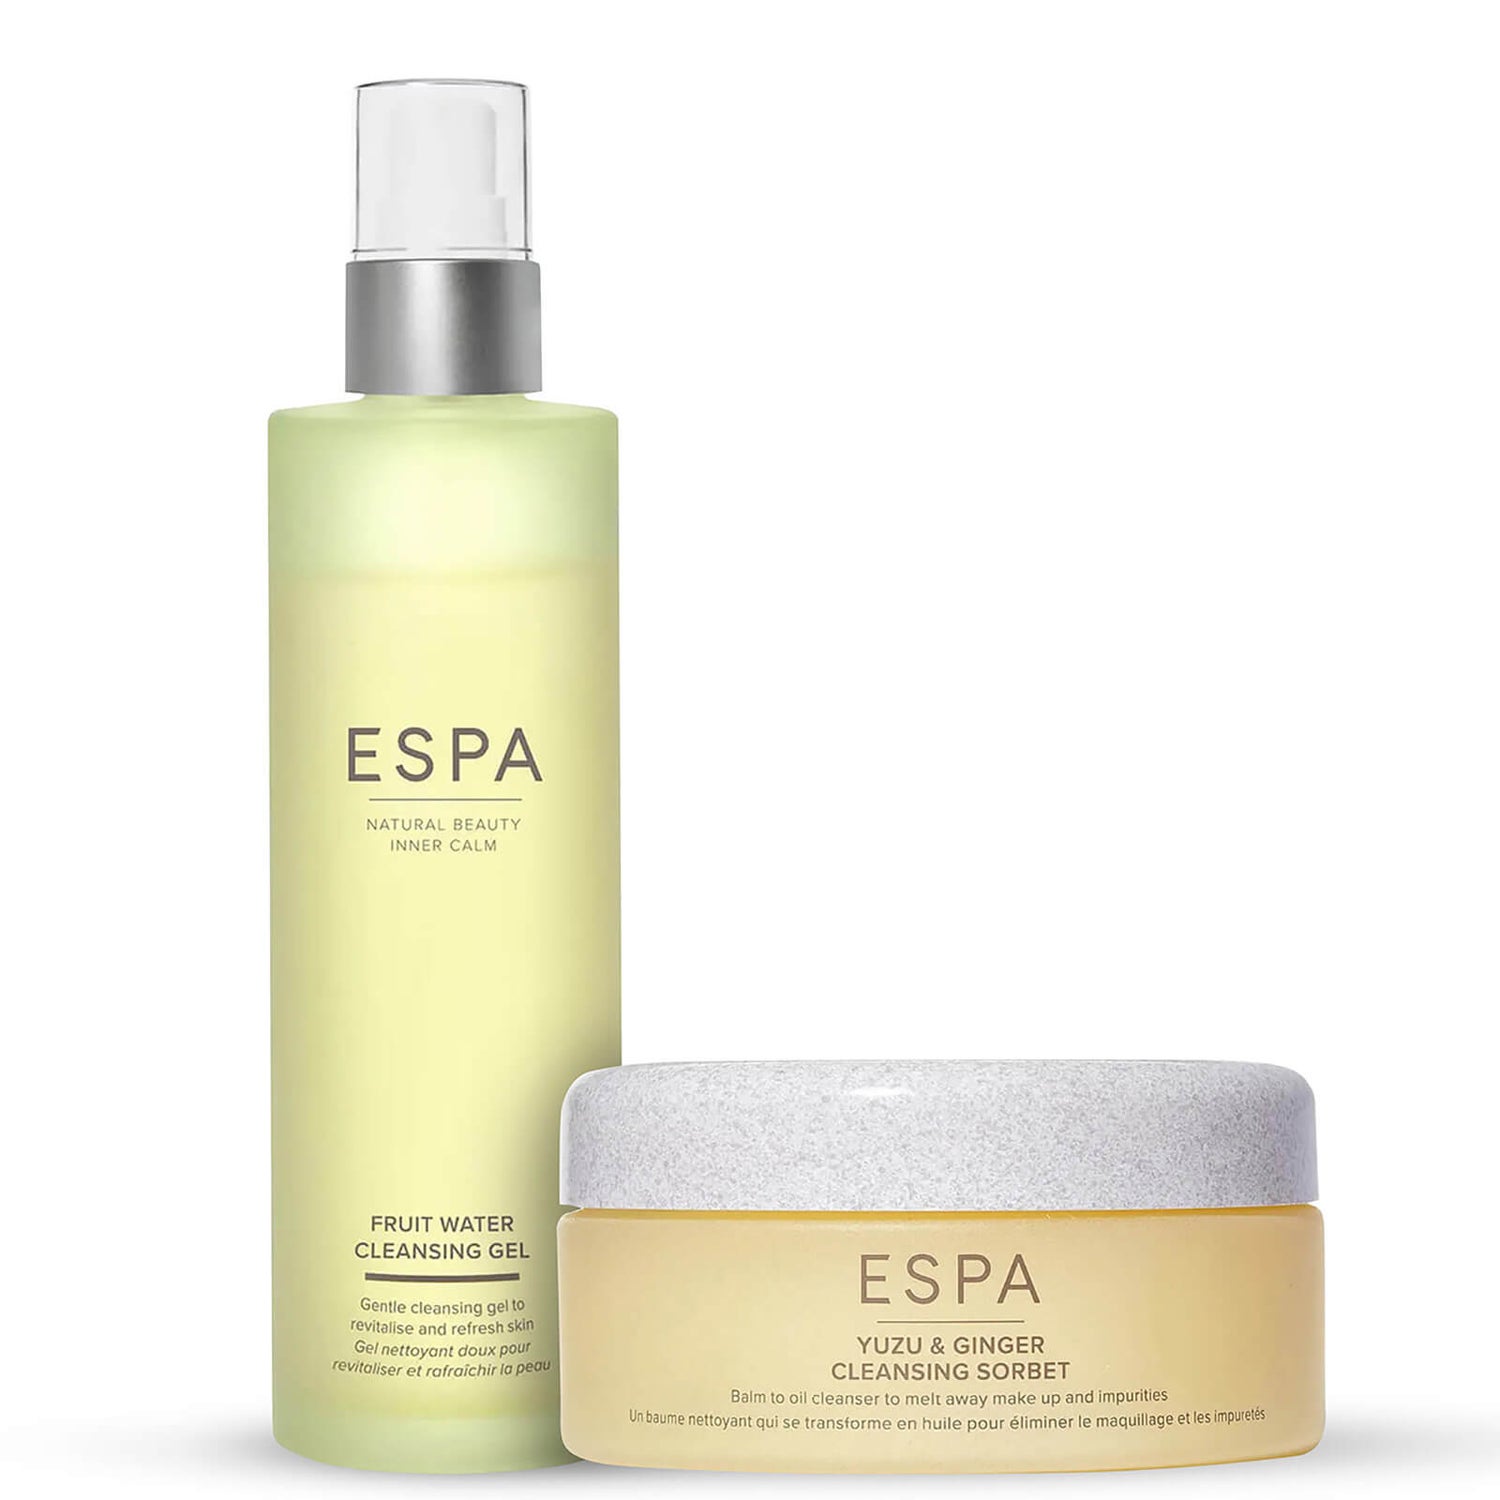 ESPA All Skin Types Double Cleanse (Worth $151.00)